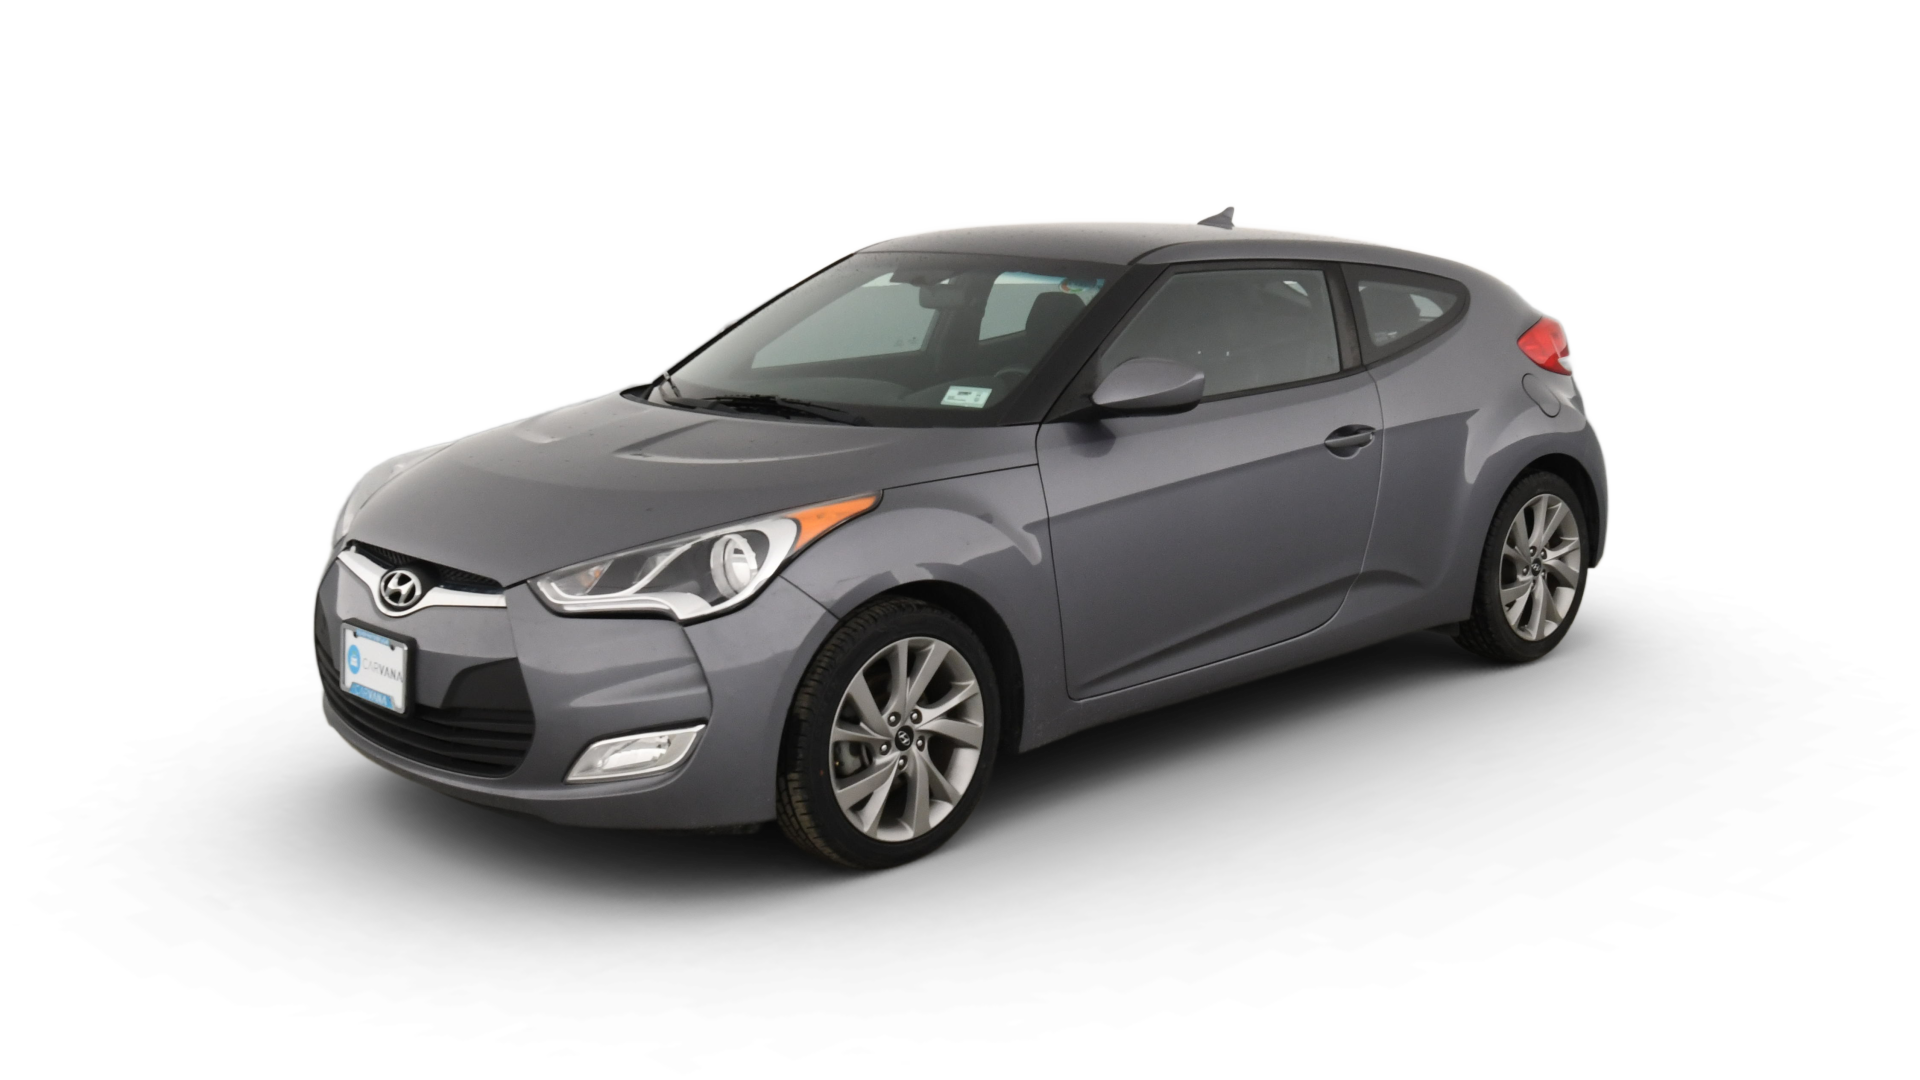 Used 2017 Hyundai Veloster For Sale Online | Carvana